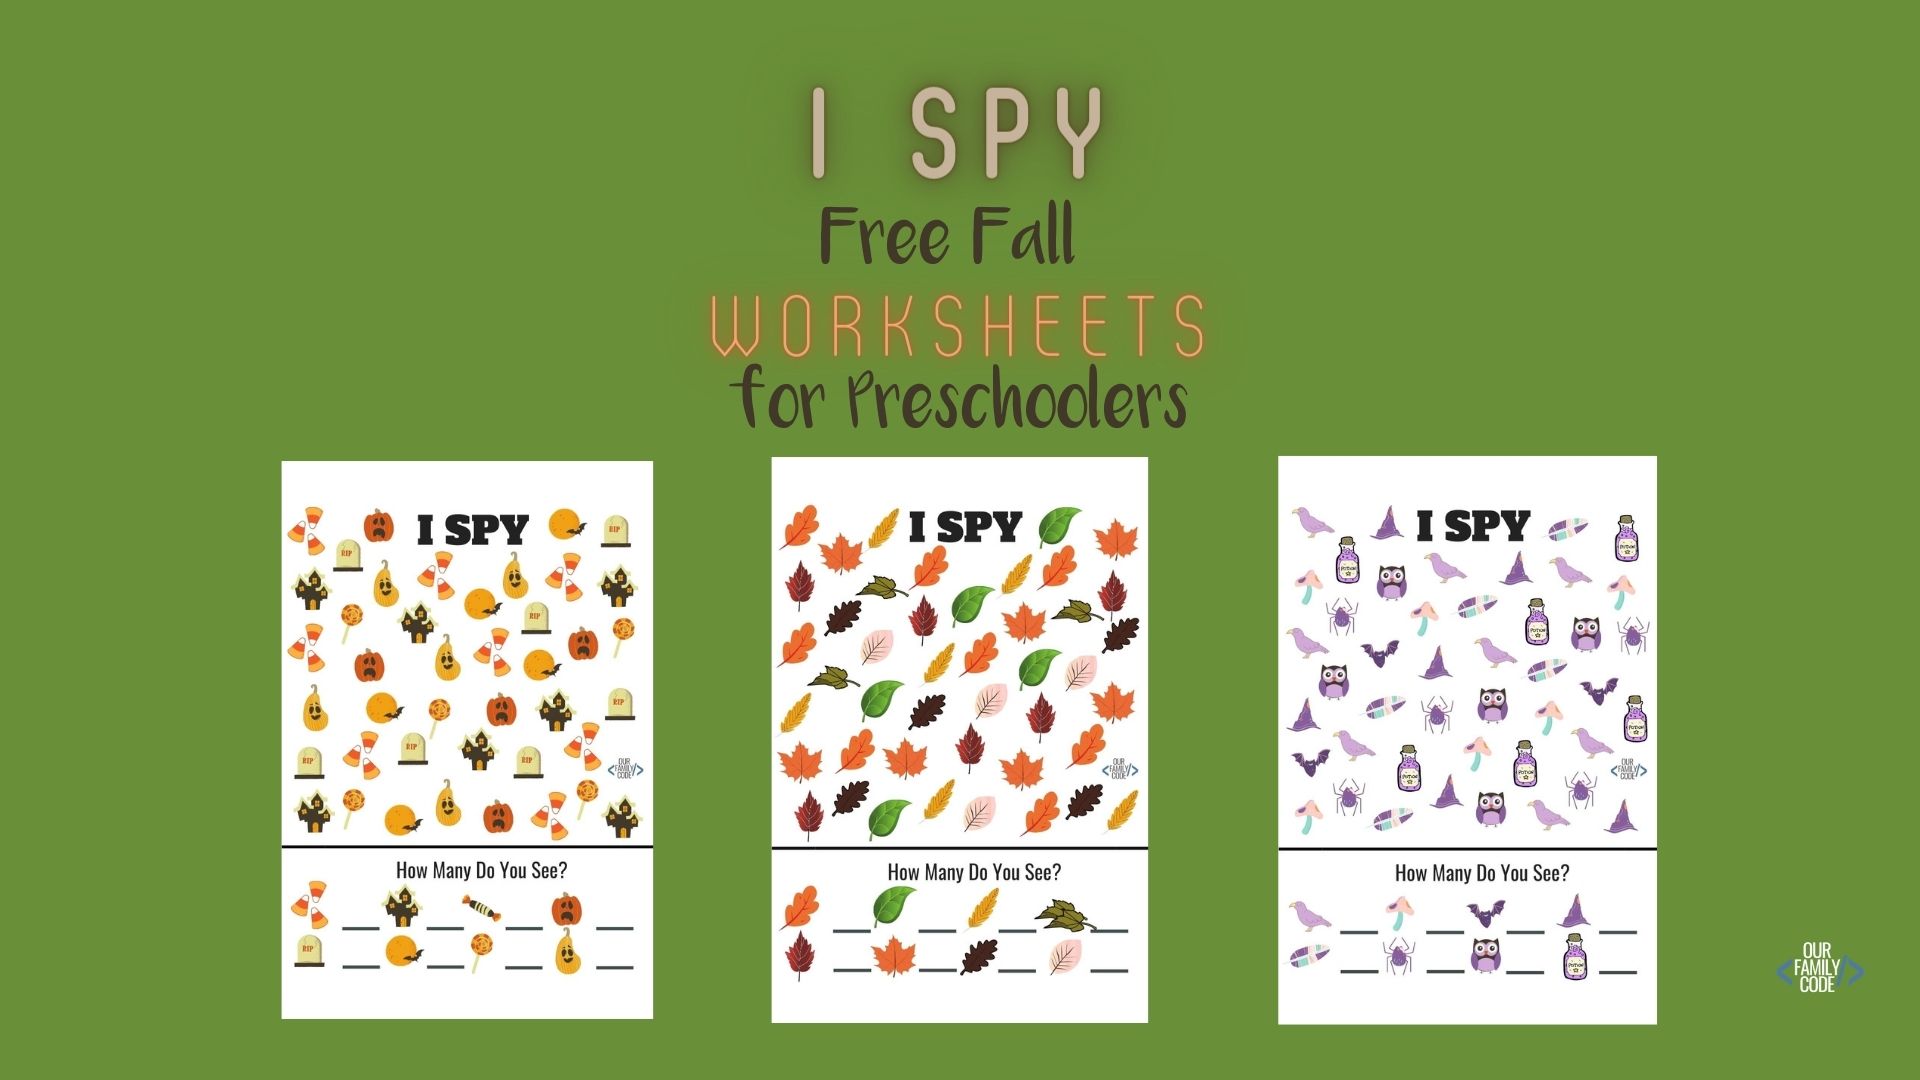 bh fb I spy worksheets fall preschool These Fall I SPY worksheets for preschoolers and toddlers are a great way to work on counting skills this Halloween season!